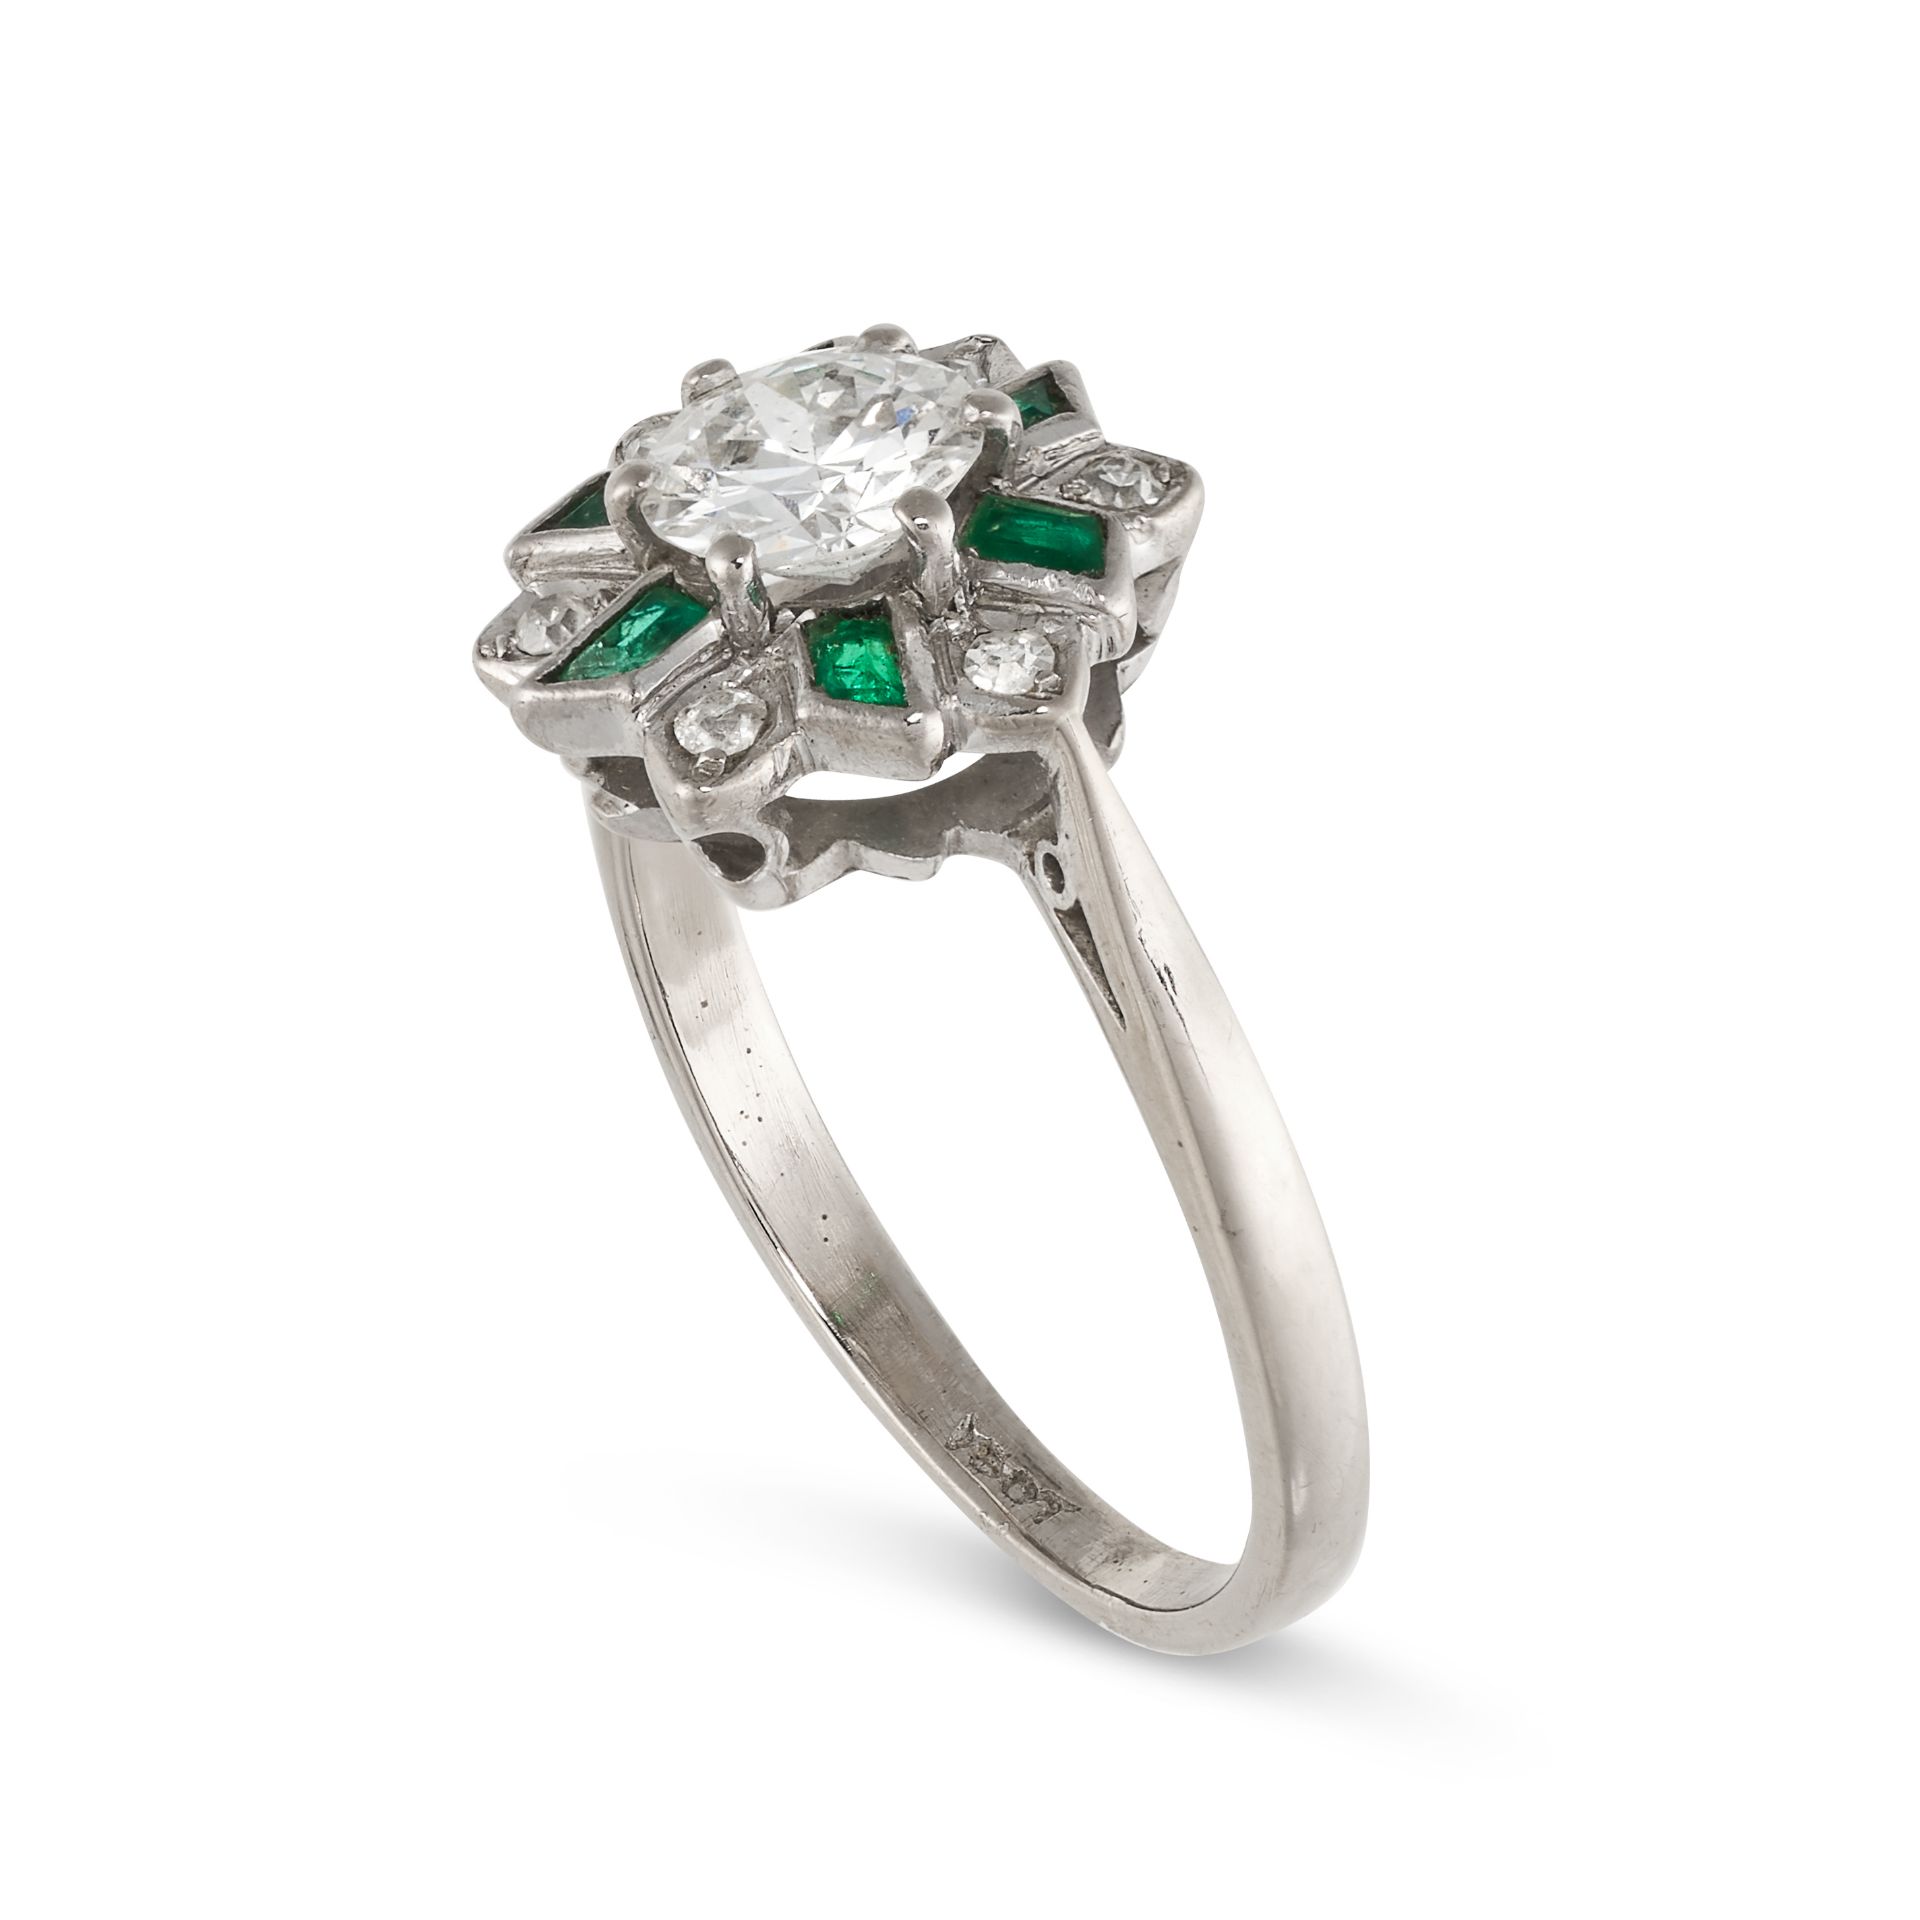 NO RESERVE - A DIAMOND AND EMERALD DRESS RING in 18ct white gold, set with a round cut diamond of - Image 2 of 2